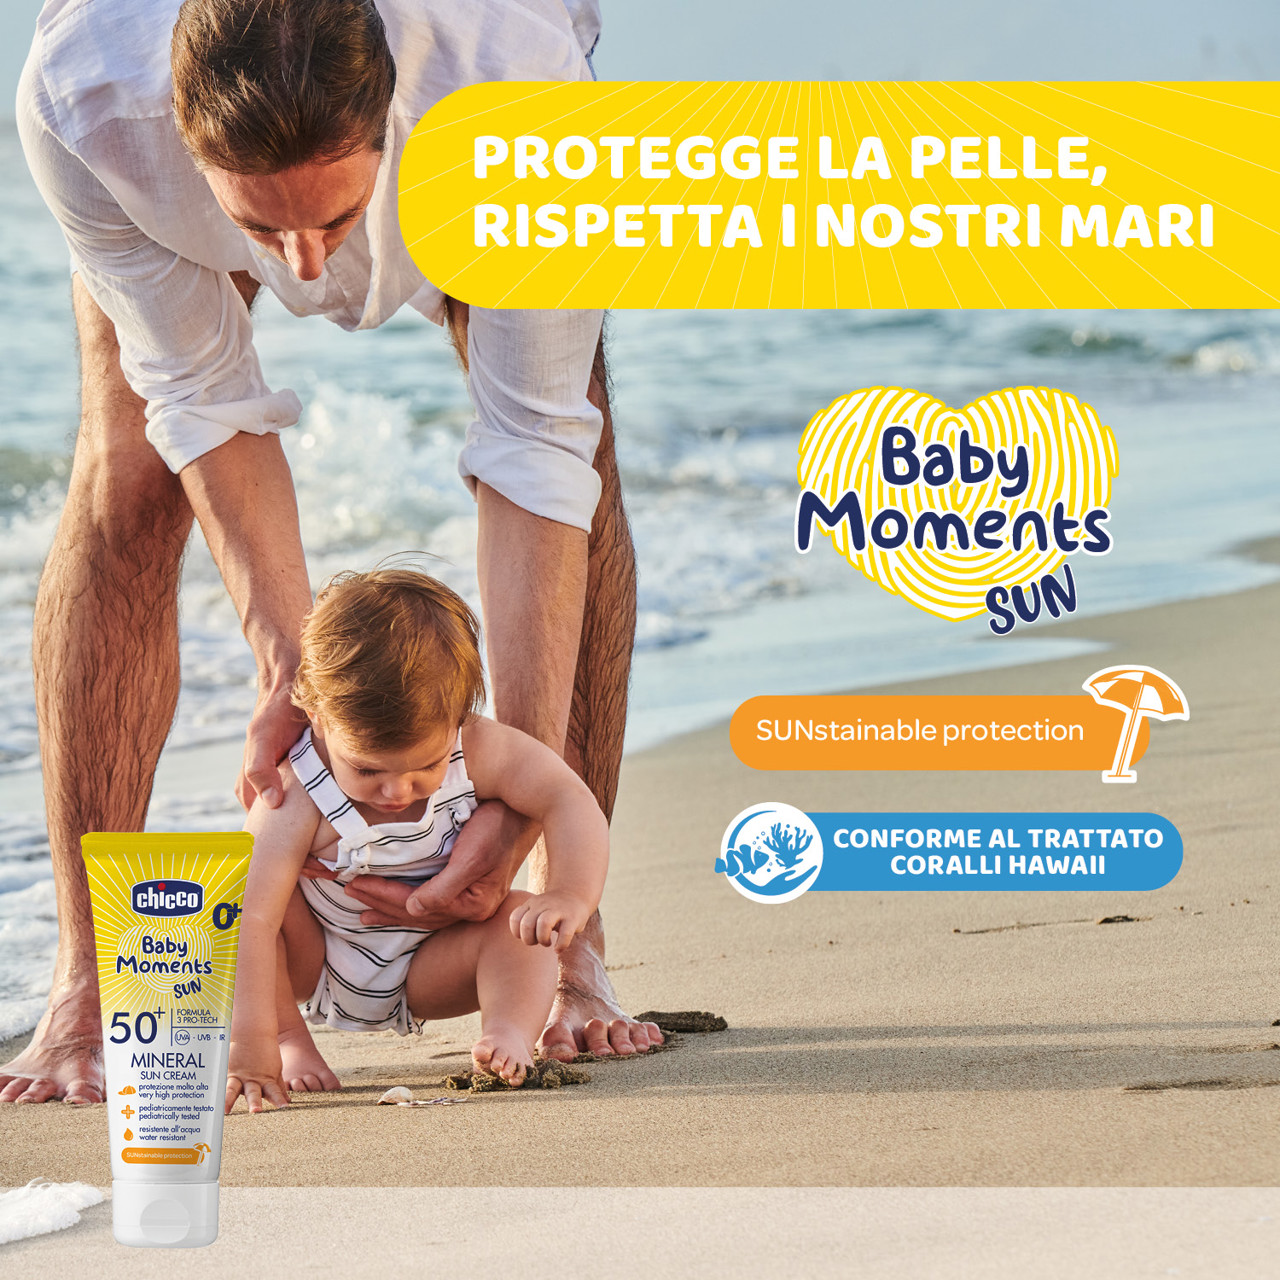 Baby Moments SUN - Crema Solare Mineral 75ml image number 1